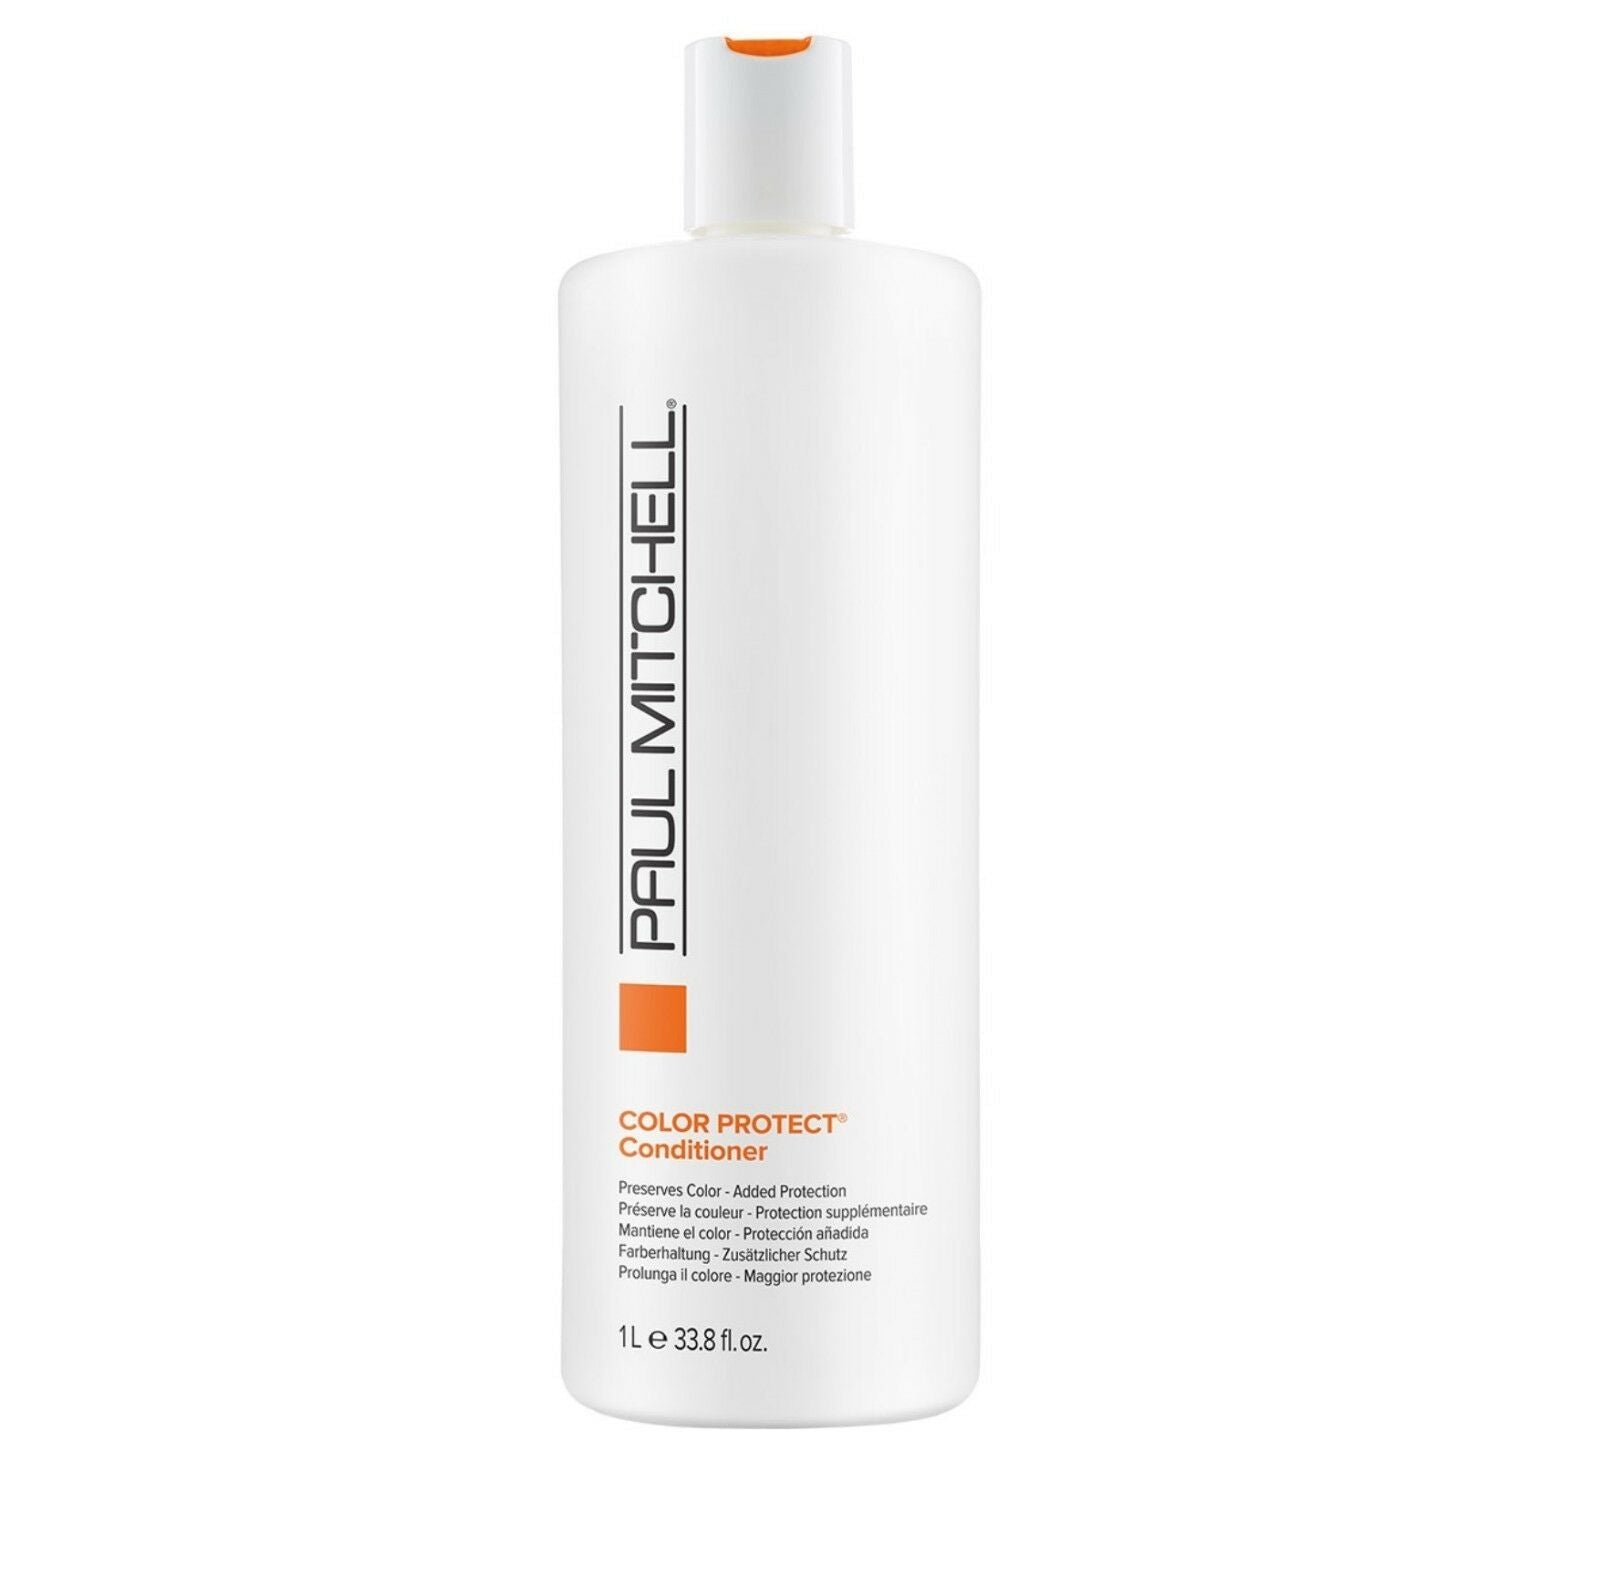 Paul Mitchell Color Protect Daily Shampoo and Conditioner 1lt Duo - On Line Hair Depot